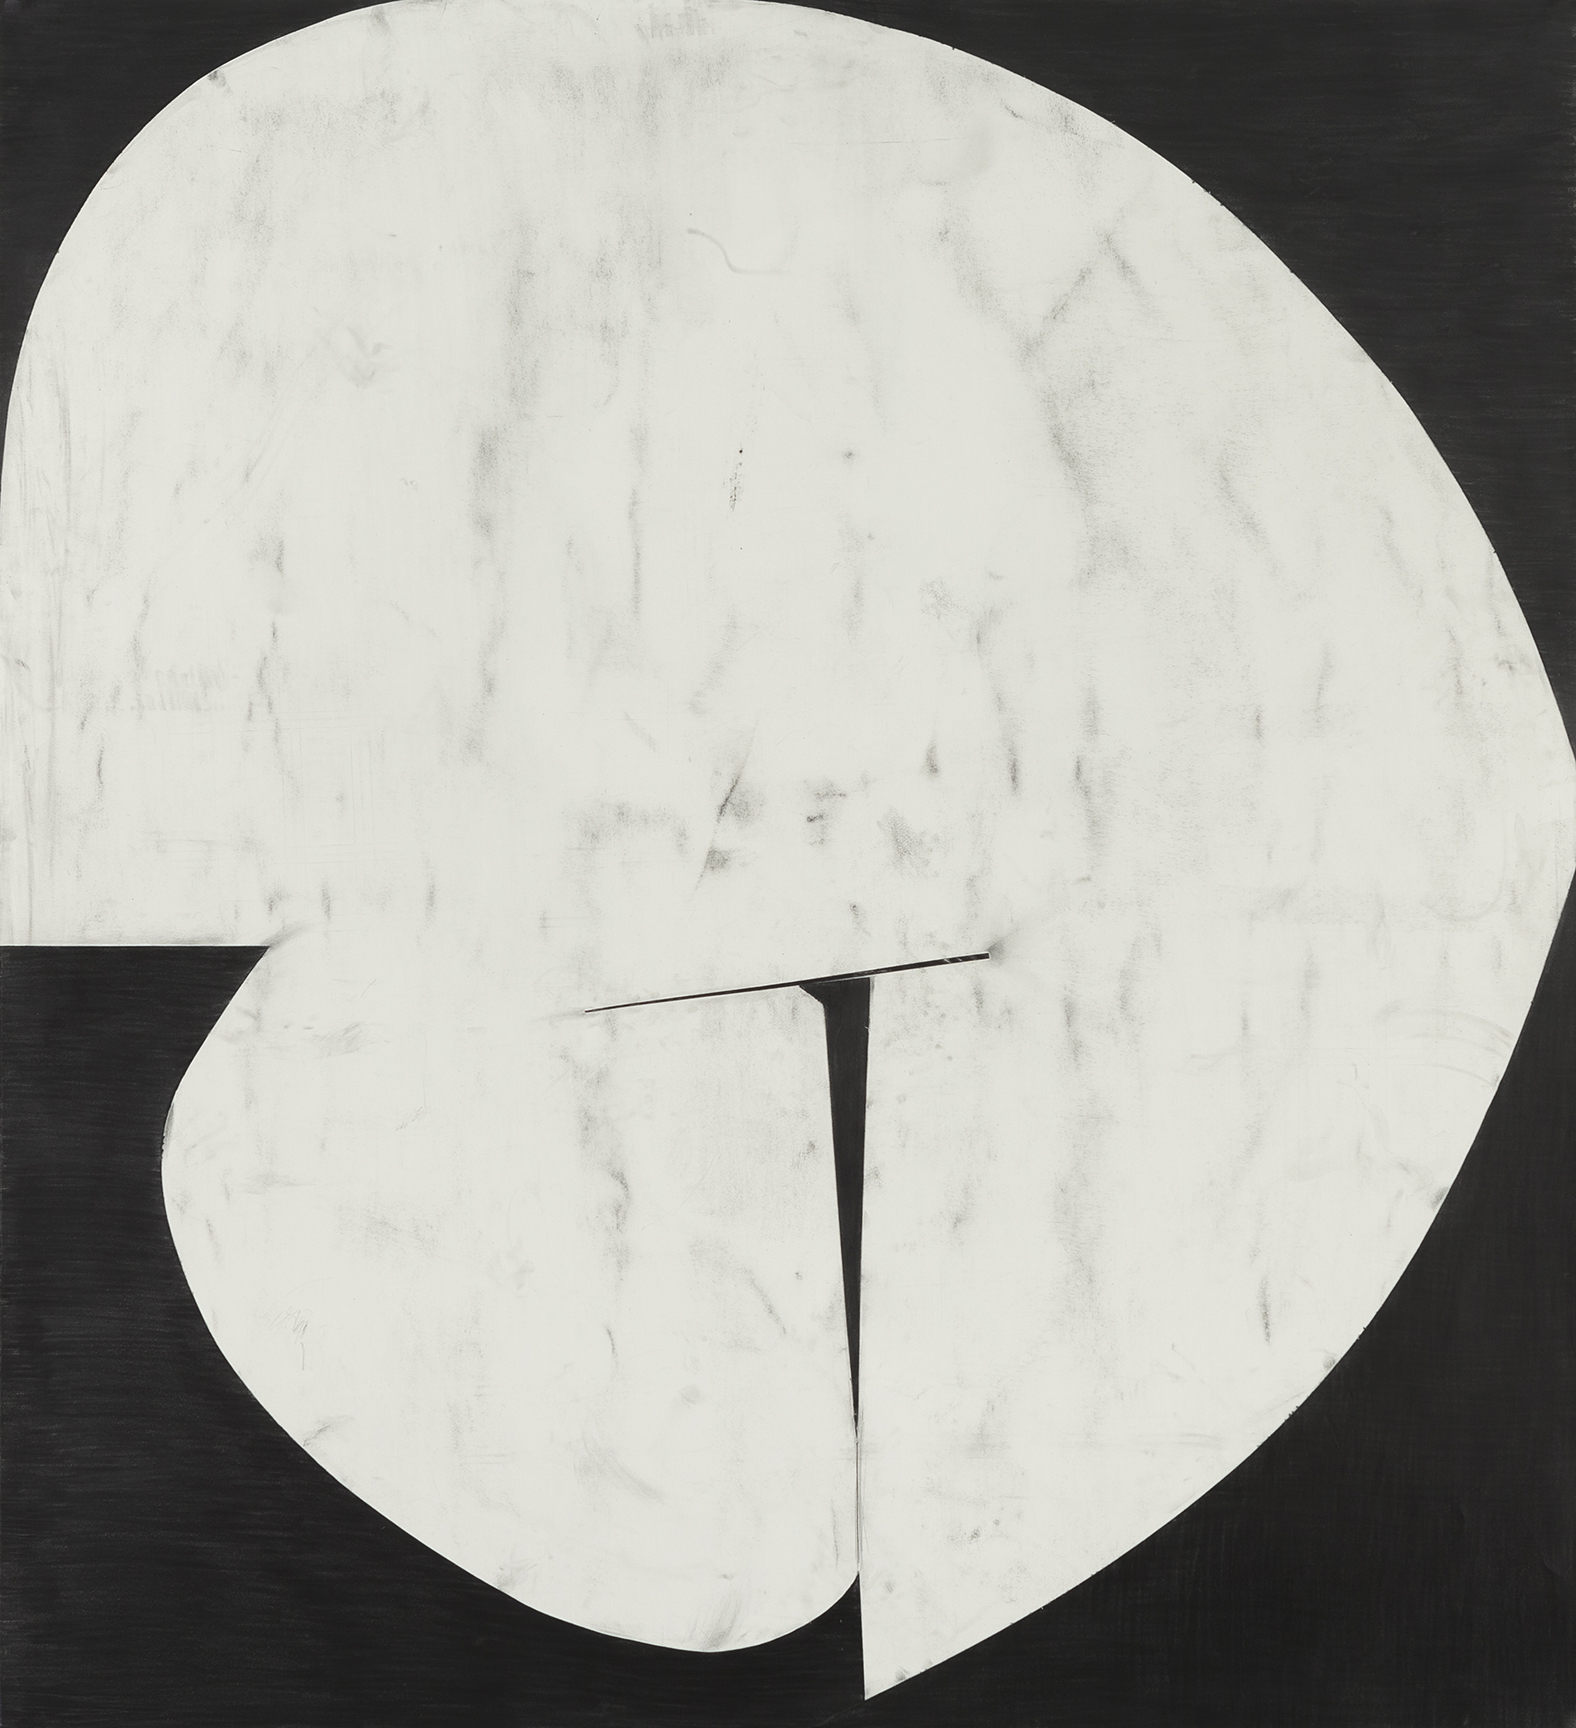 Javier_Romero-12_Untitled_2014_Graphite_on_cut_and_collaged_paper